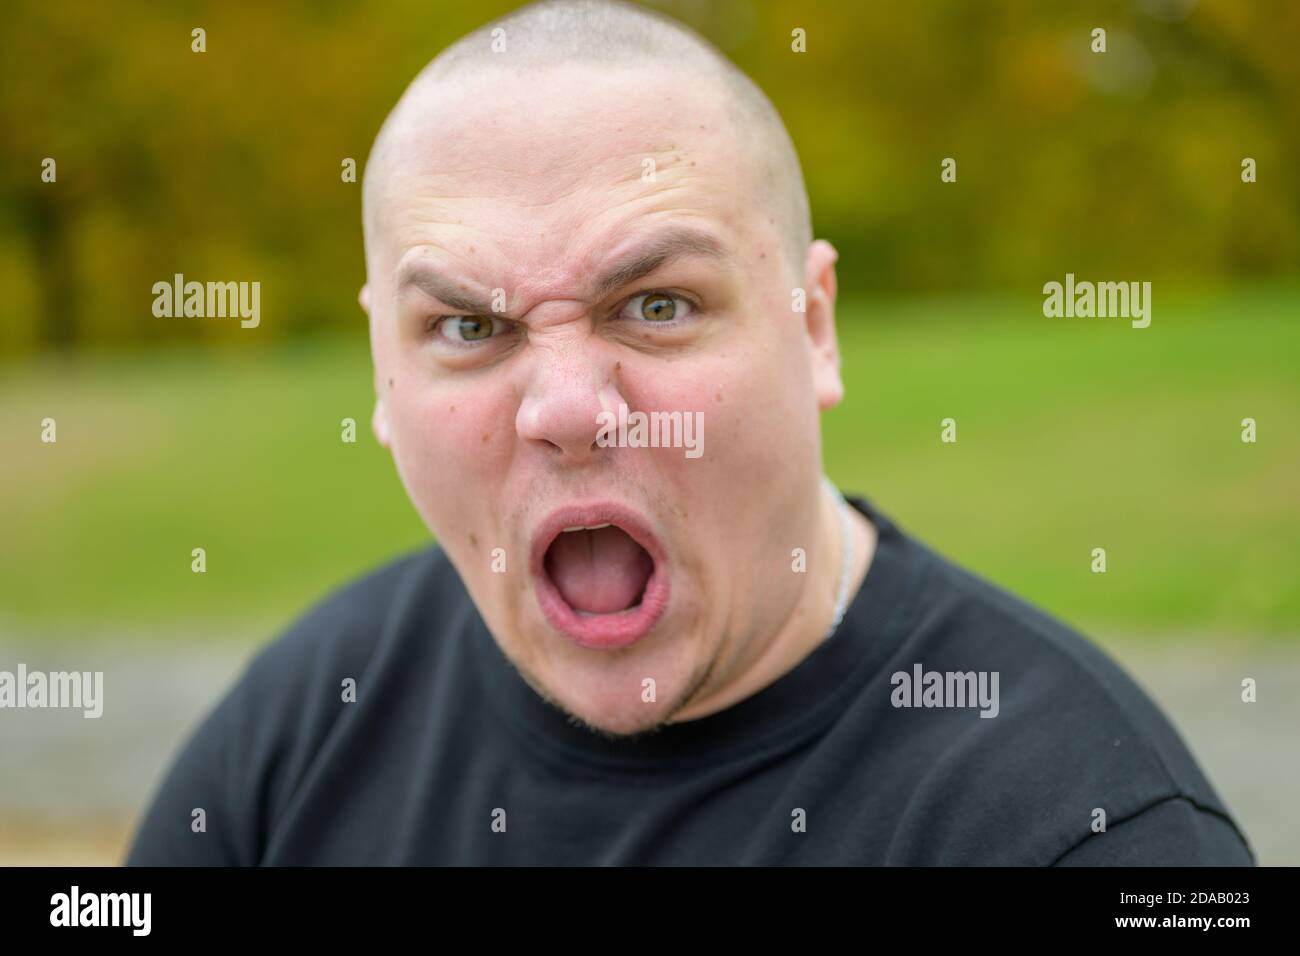 Young man pulling a menacing ugly face at the camera gawping and frowning with a baleful stare outdoors in a park Stock Photo